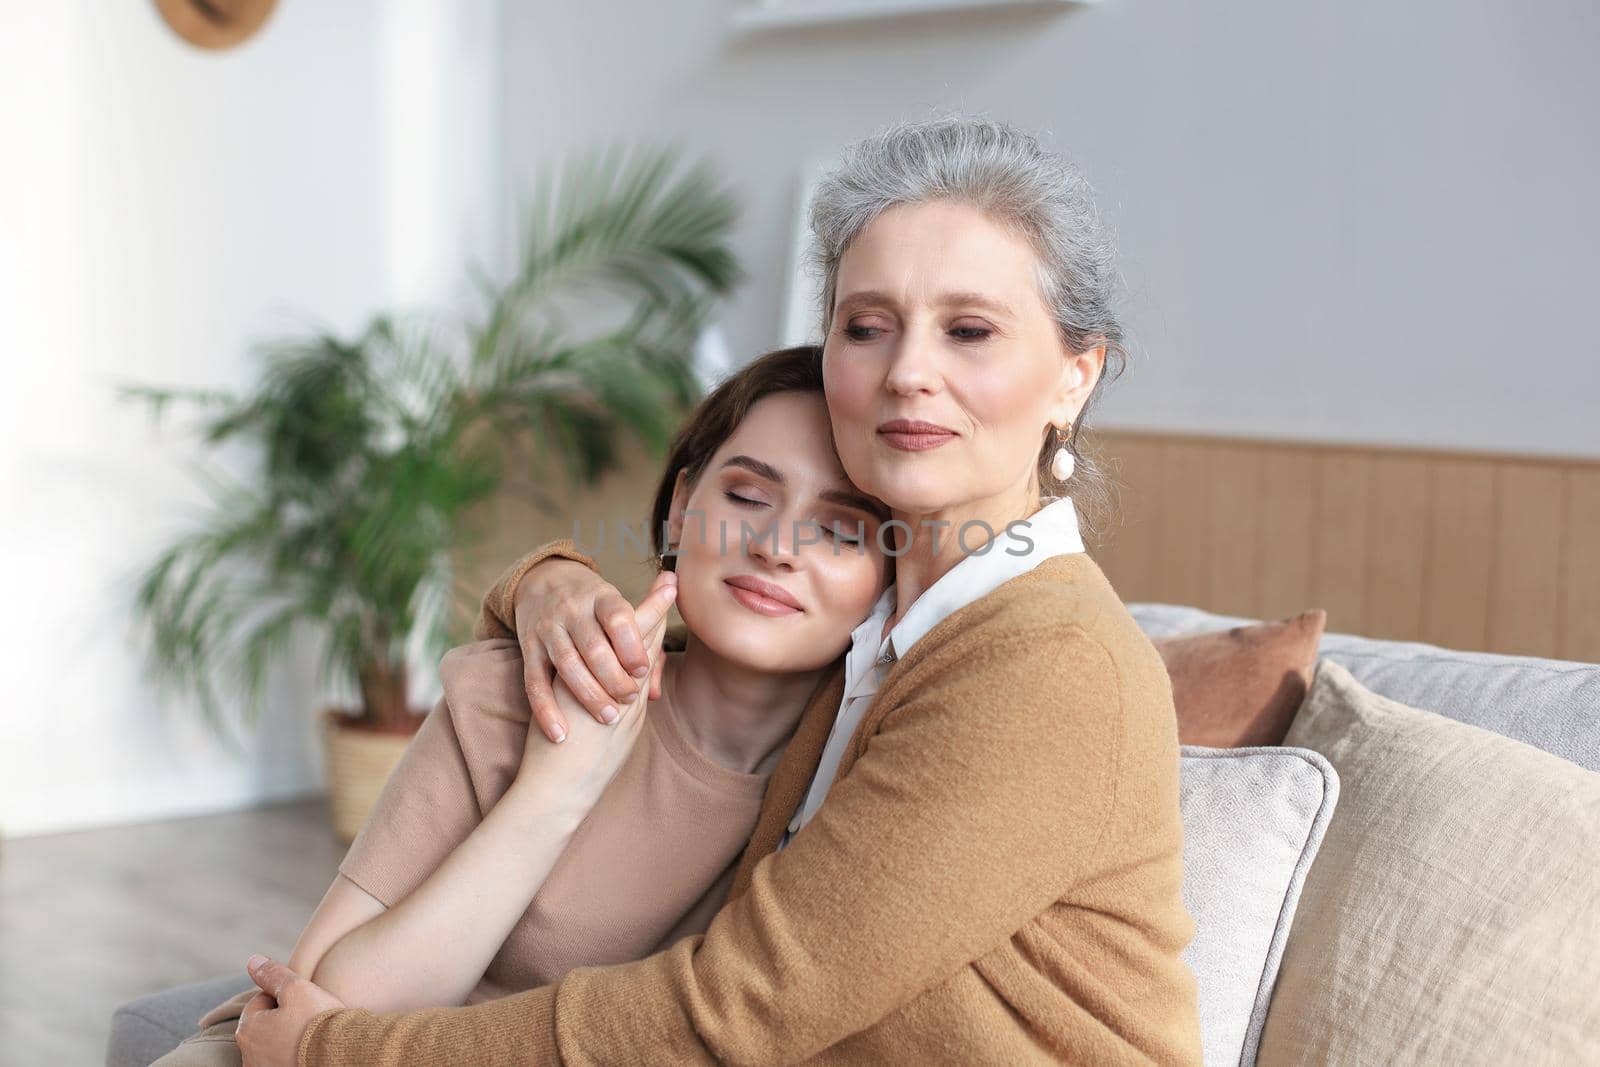 Cheerful young woman is embracing her middle aged mother with closed eyes hugging, touching cheeks, sitting on couch at home. Happy trusted relations. Family concept. by tsyhun